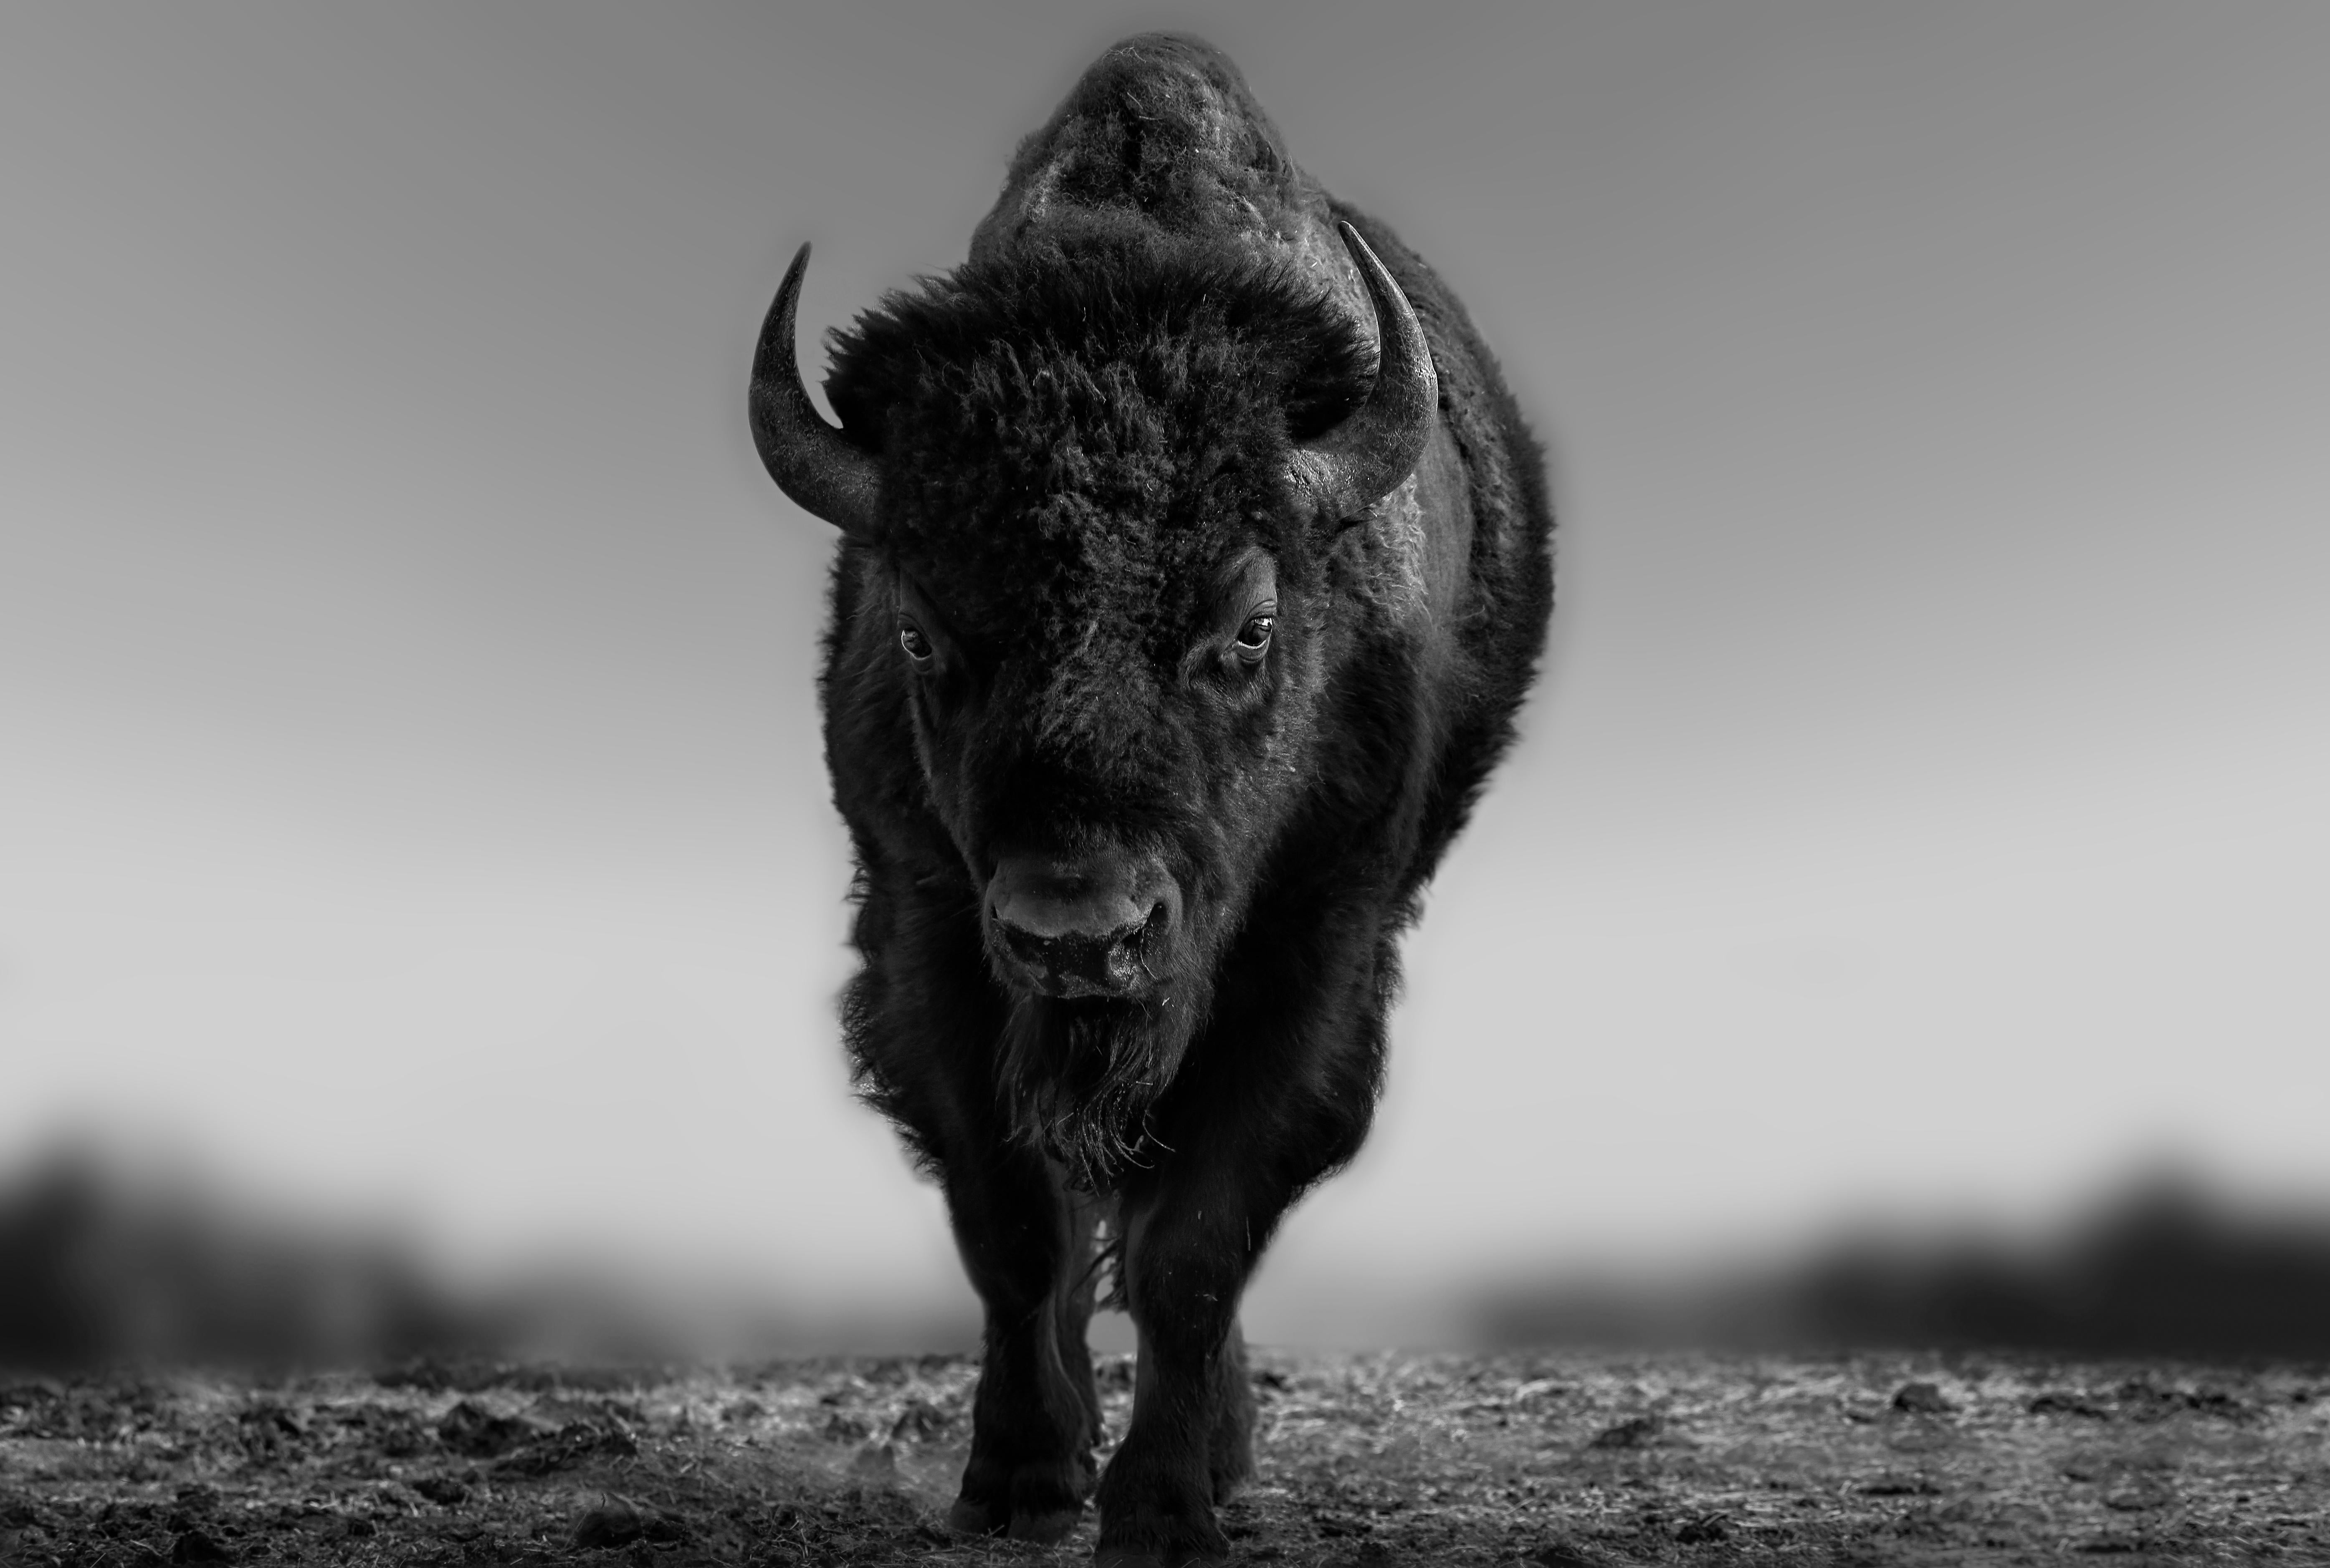  "The Beast" 28x40 - Black and White Photography of Bison, Buffalo Western Art